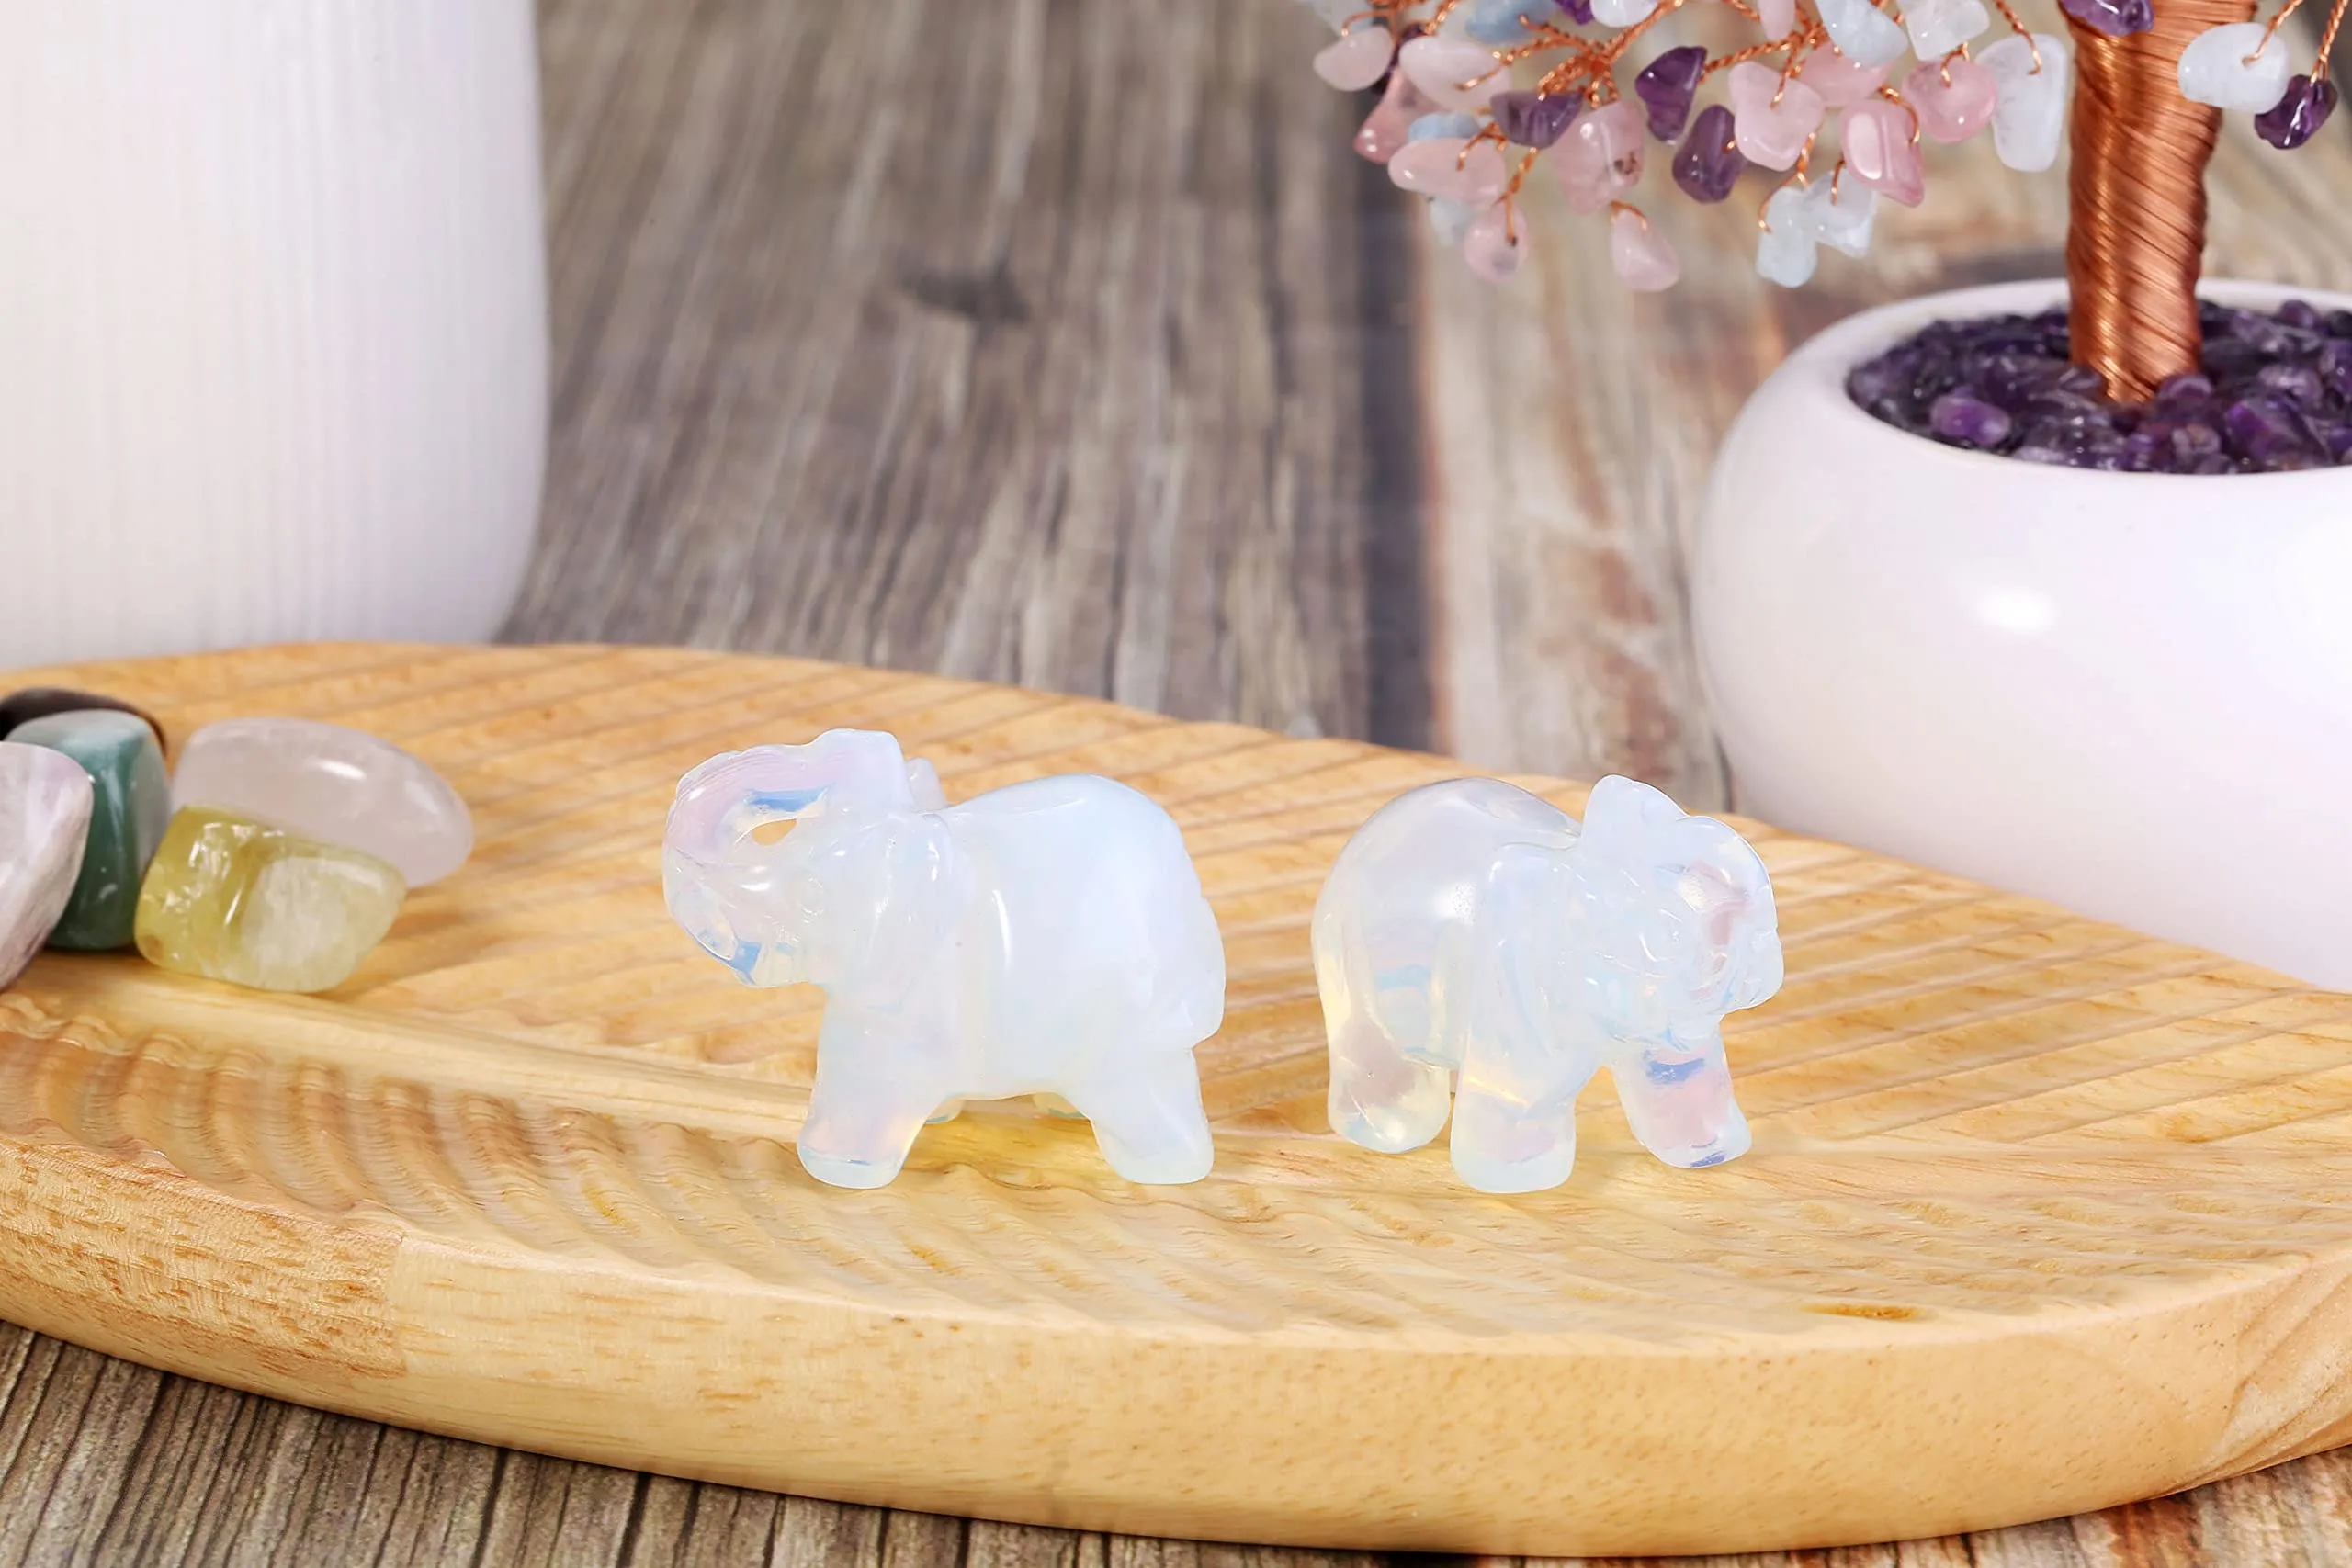 healing crystal stones elephant figurines reiki gemstone crafts statues elephant gifts collectible decor for home office desk 1 5 inches cherry quartz tiger eye stone opal